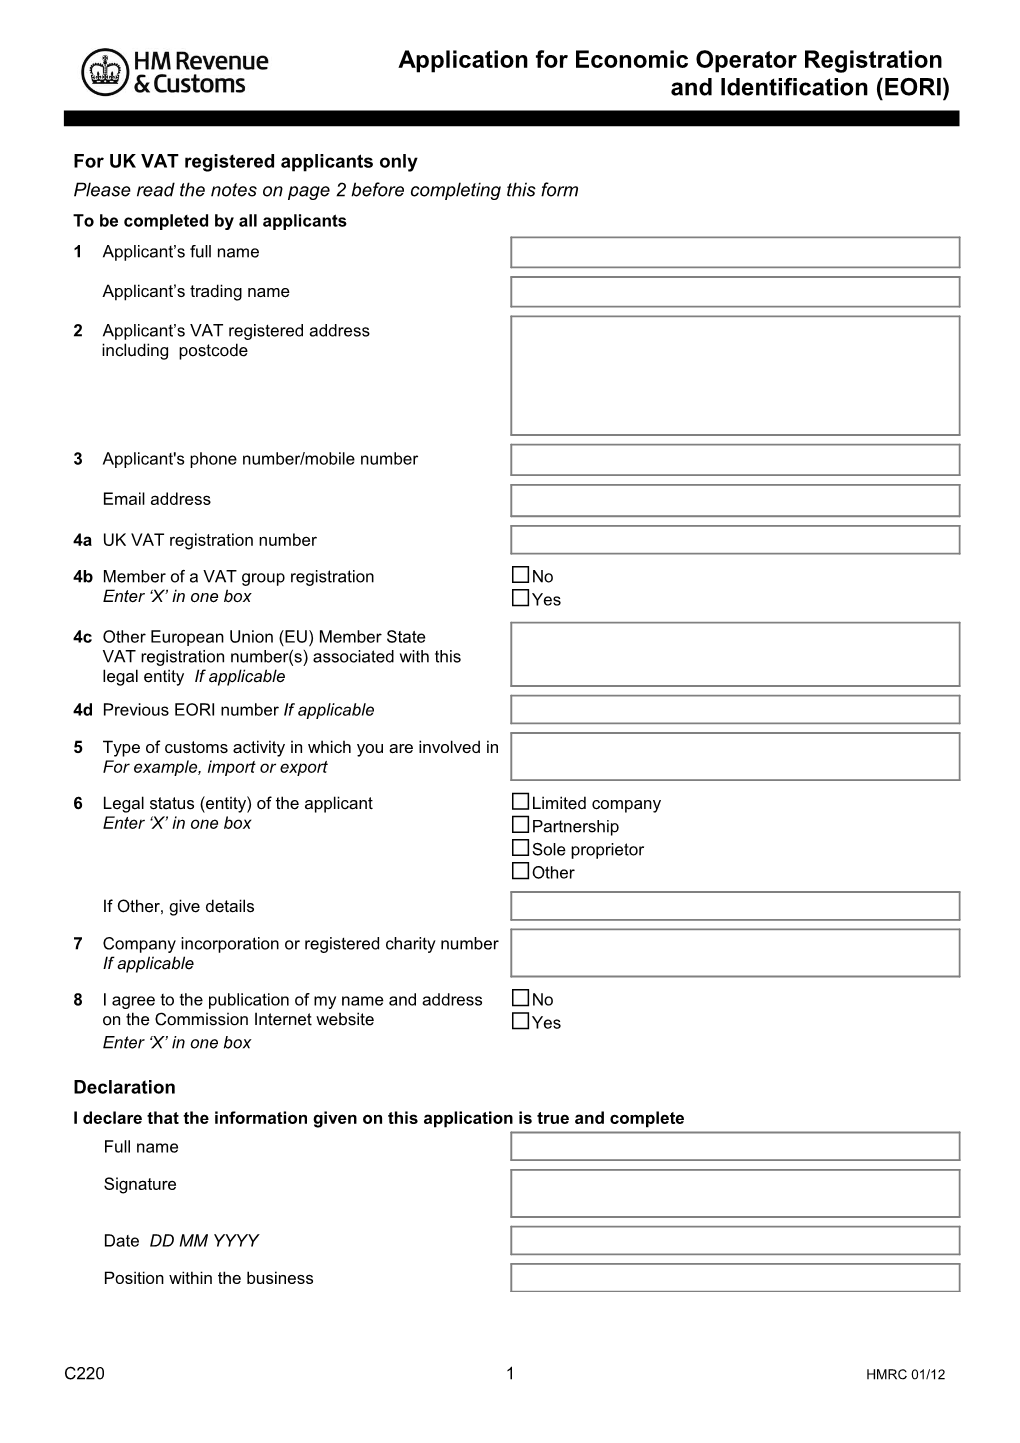 Please Read the Notes on Page 2Before Completing This Form